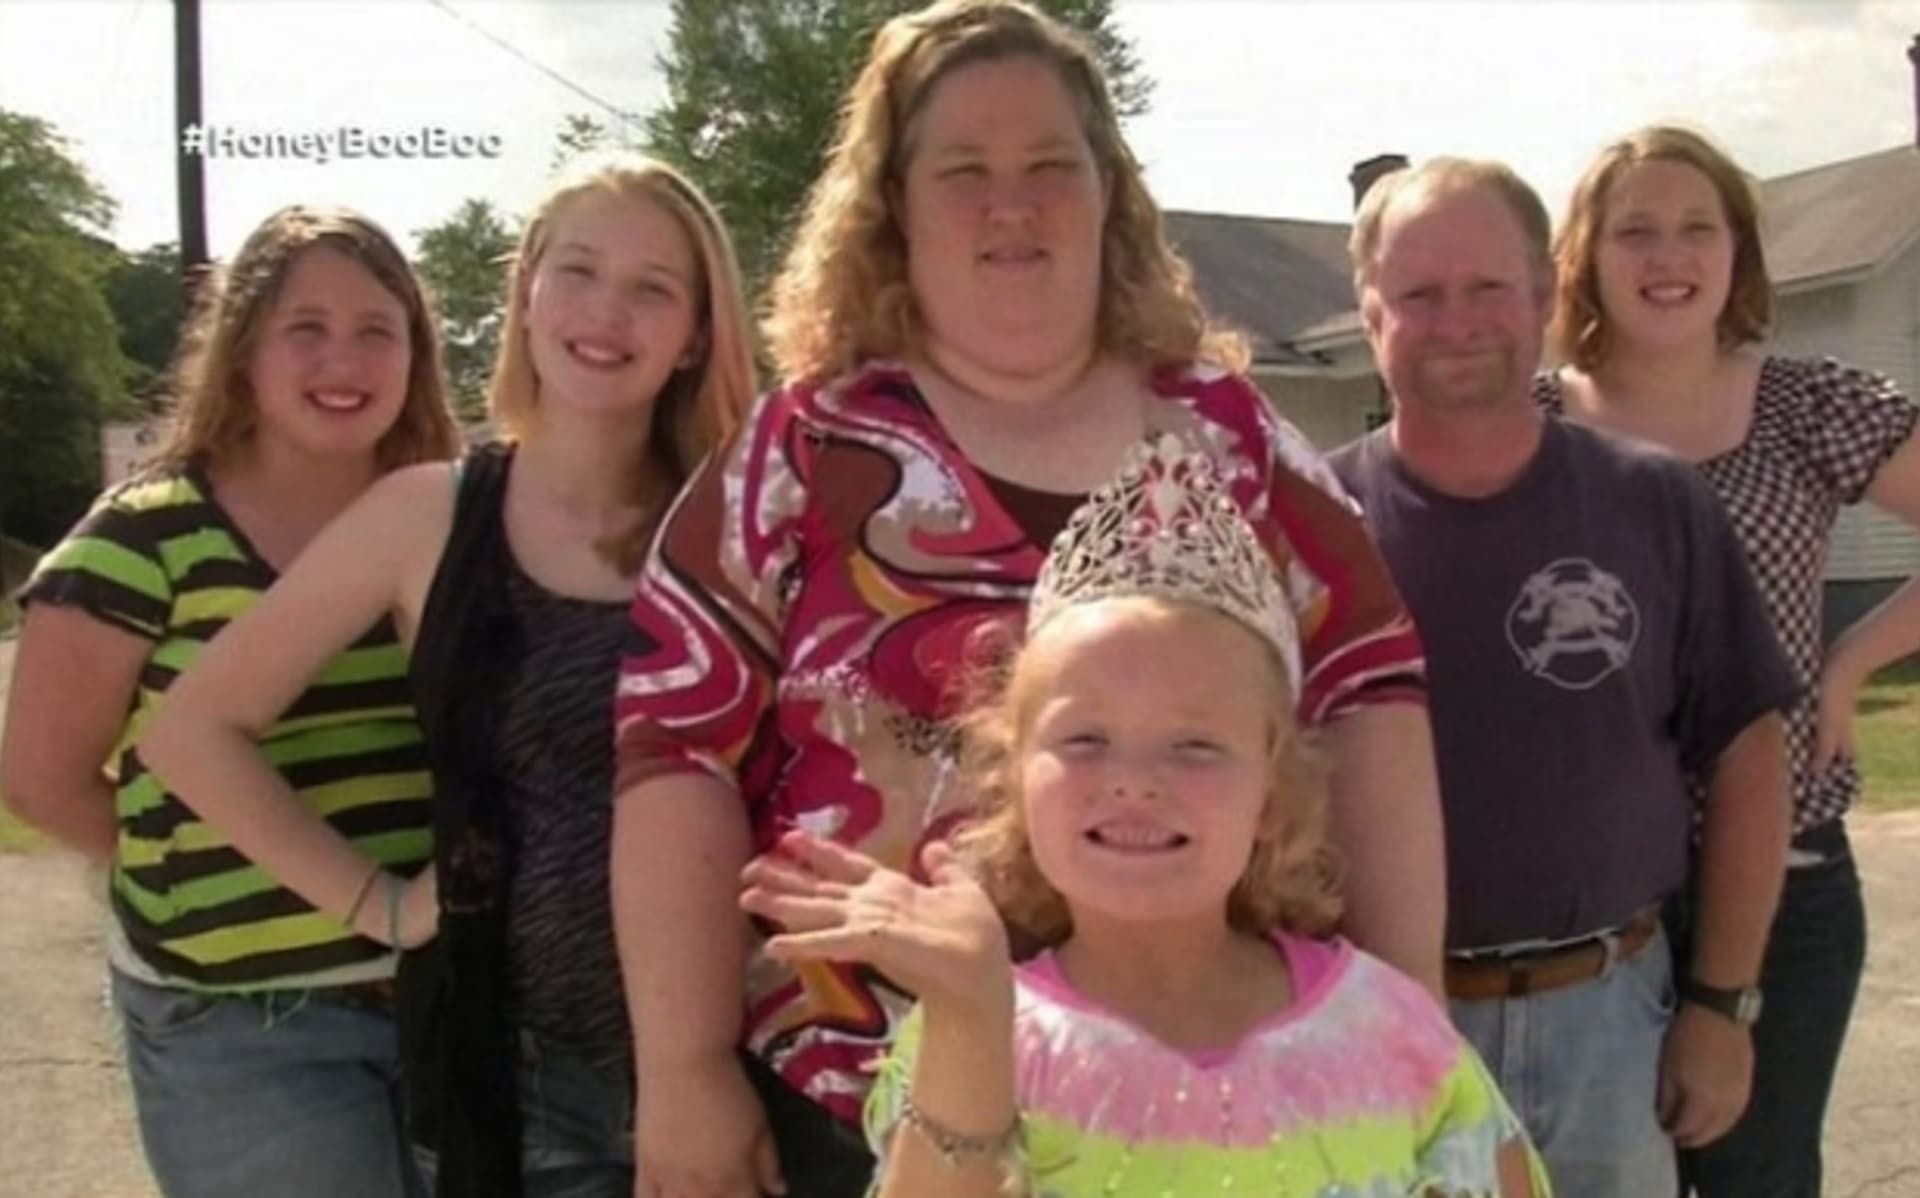 Reality show Here Comes Honey Boo Boo